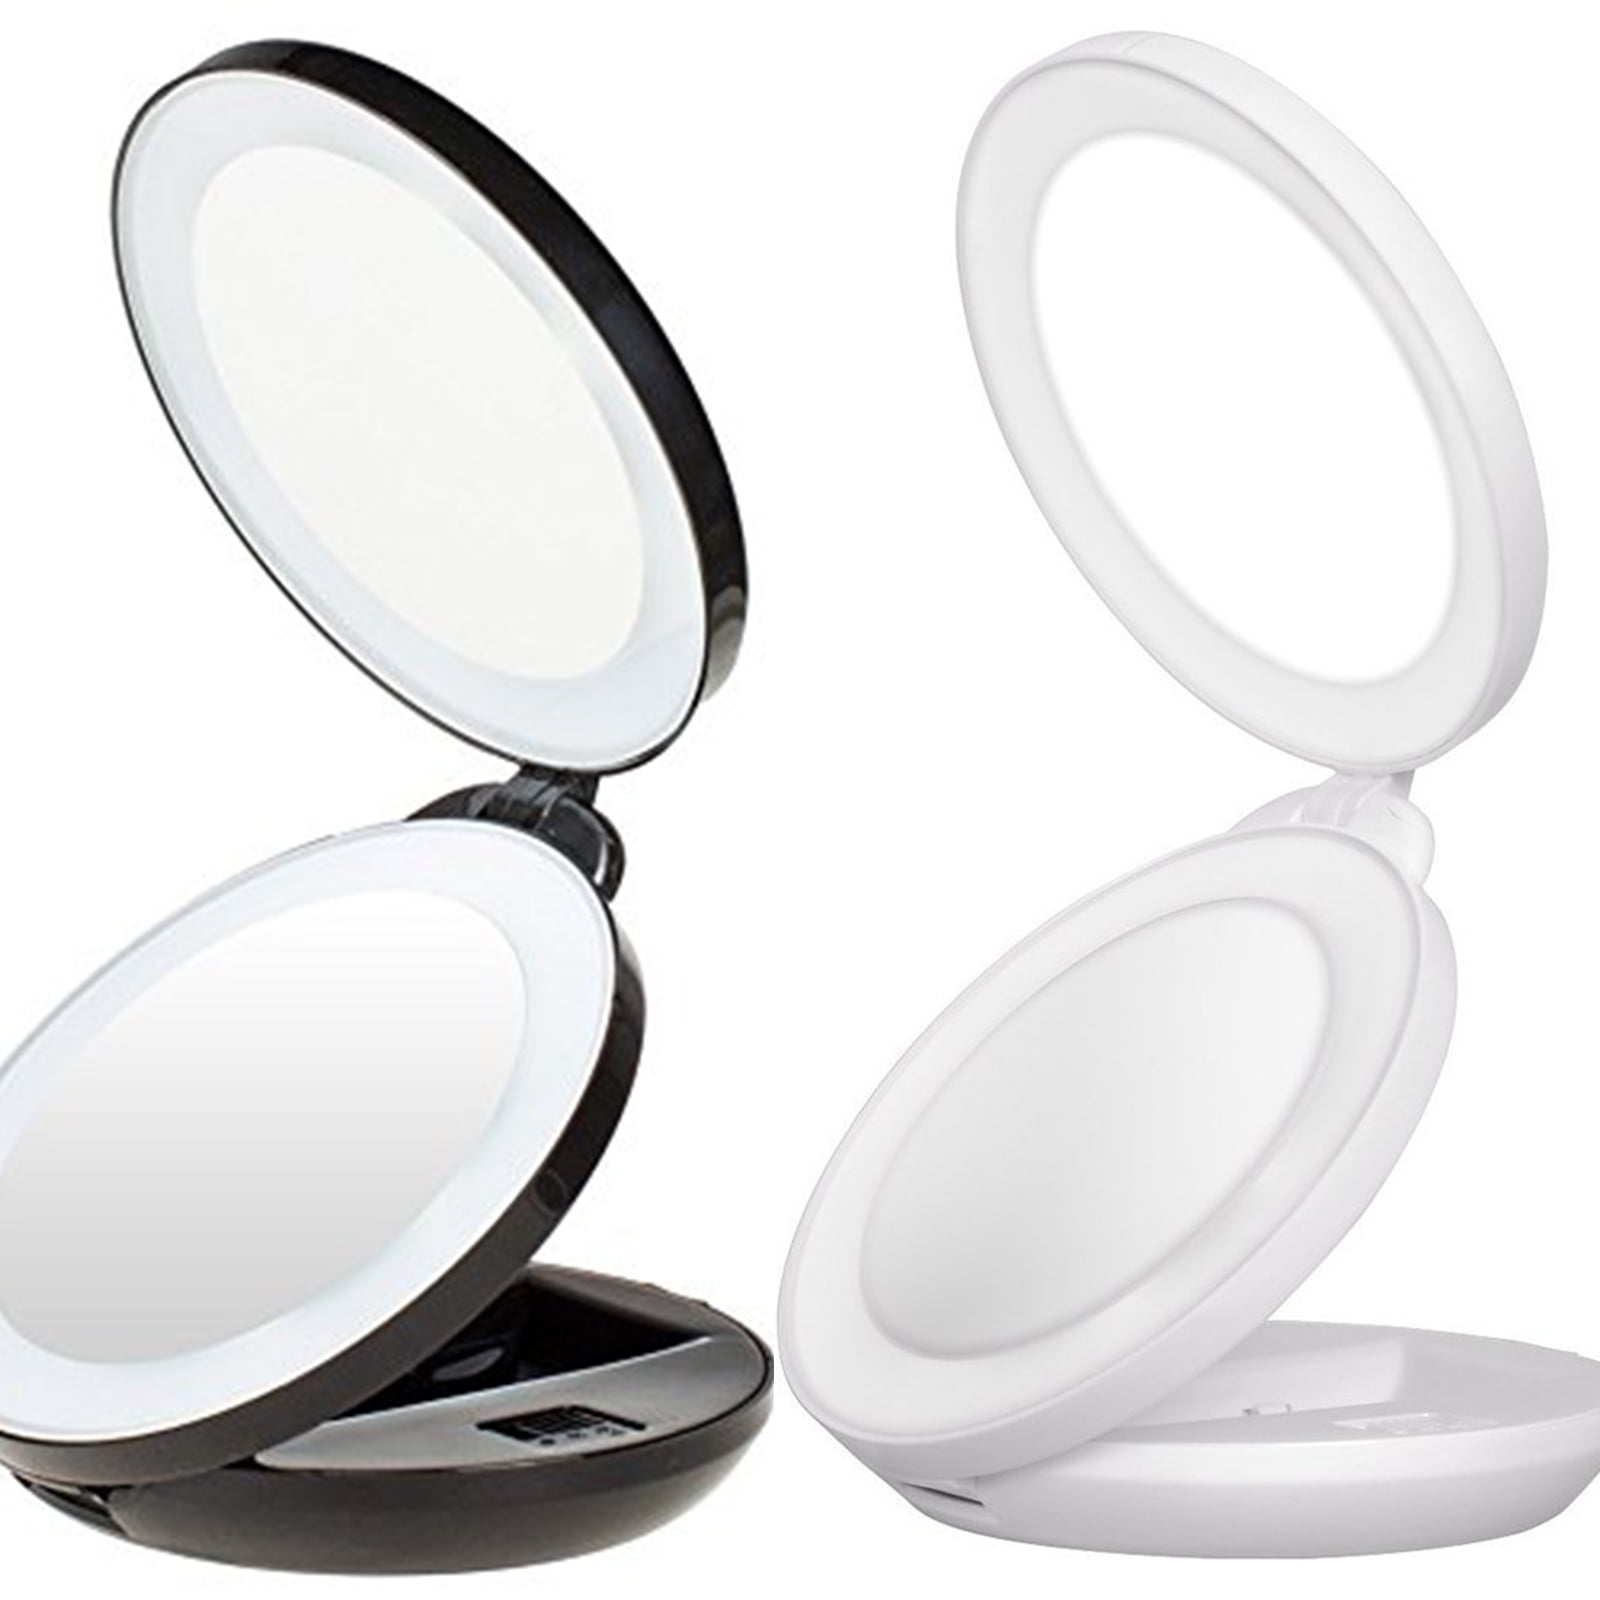 Makeup Mirror 10x Magnification With Light - Beauty & Health